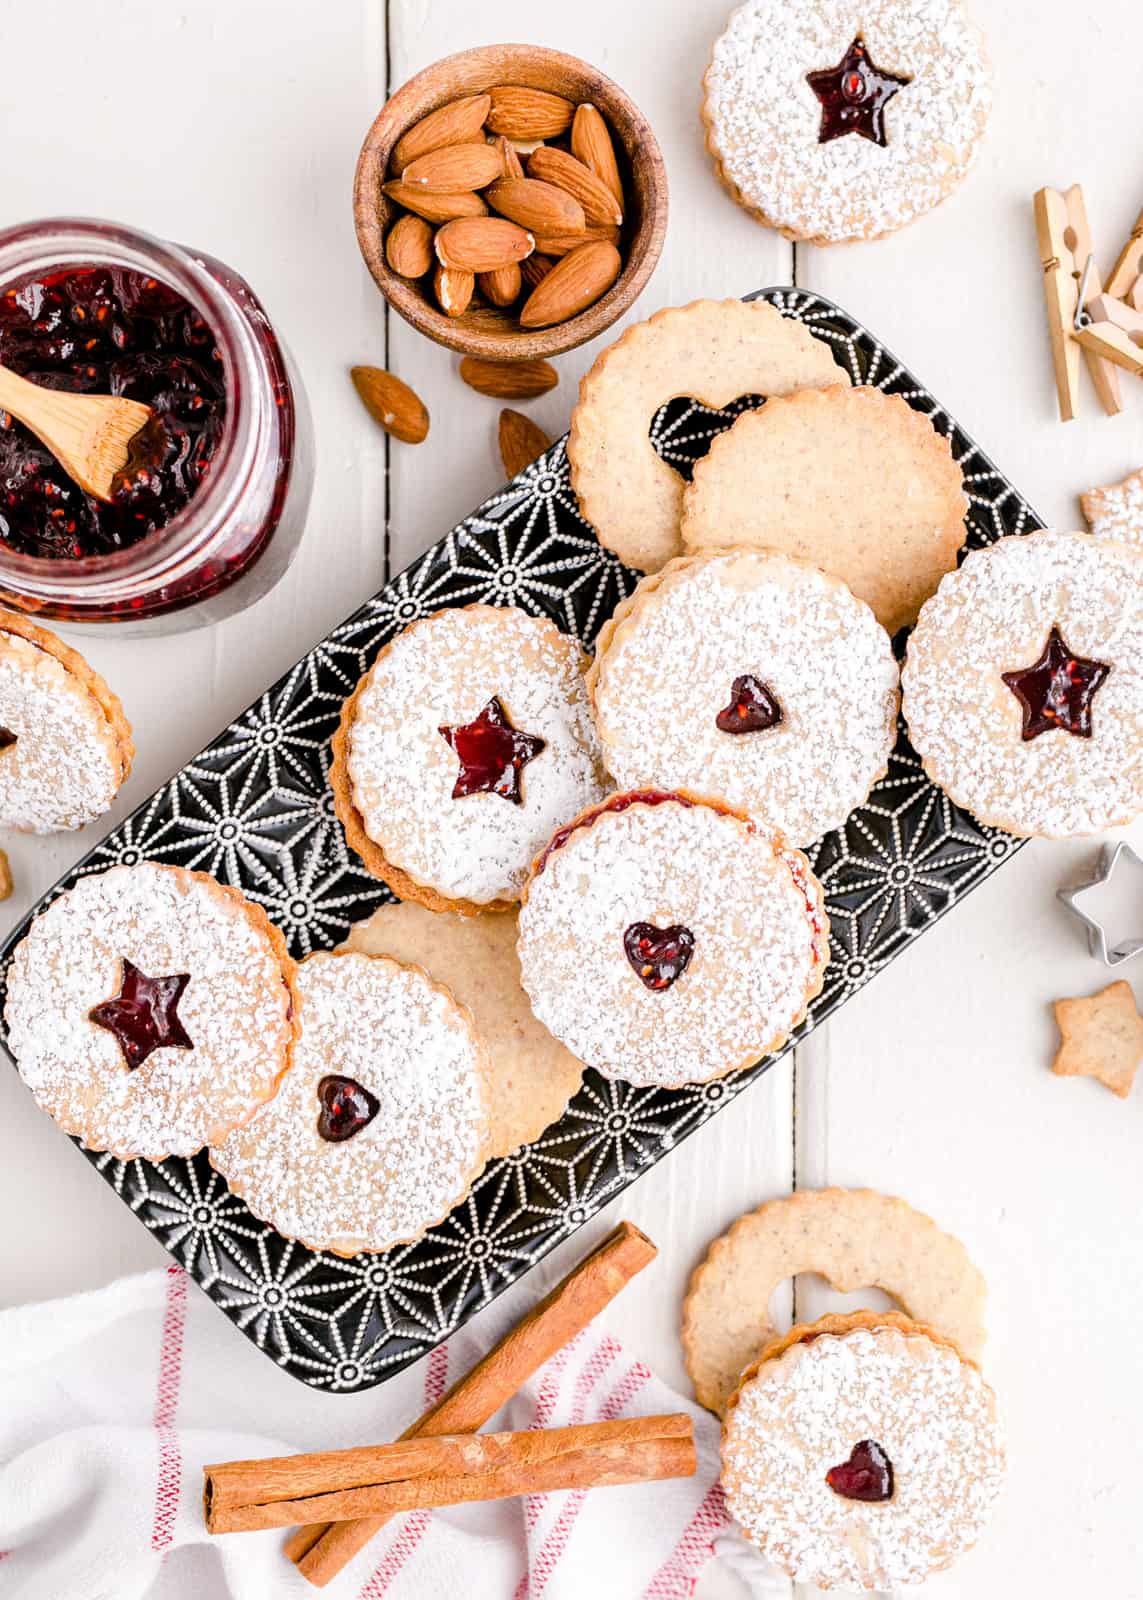 Overhead of Linzer Cookies on tray with almonds, jam and cinnamon sticks.